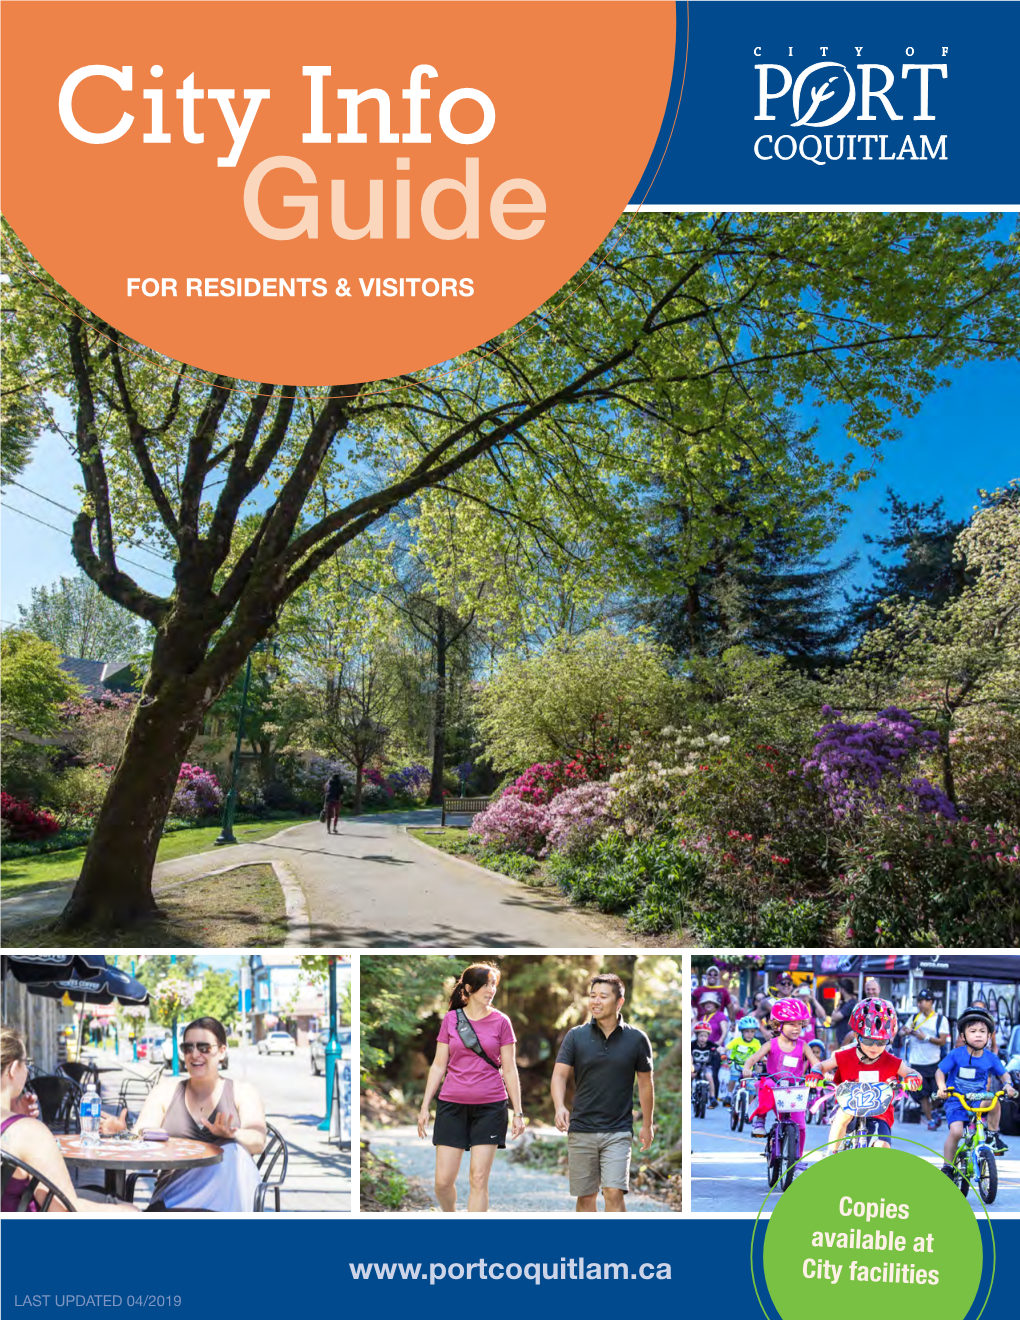 City Info Guide for RESIDENTS & VISITORS